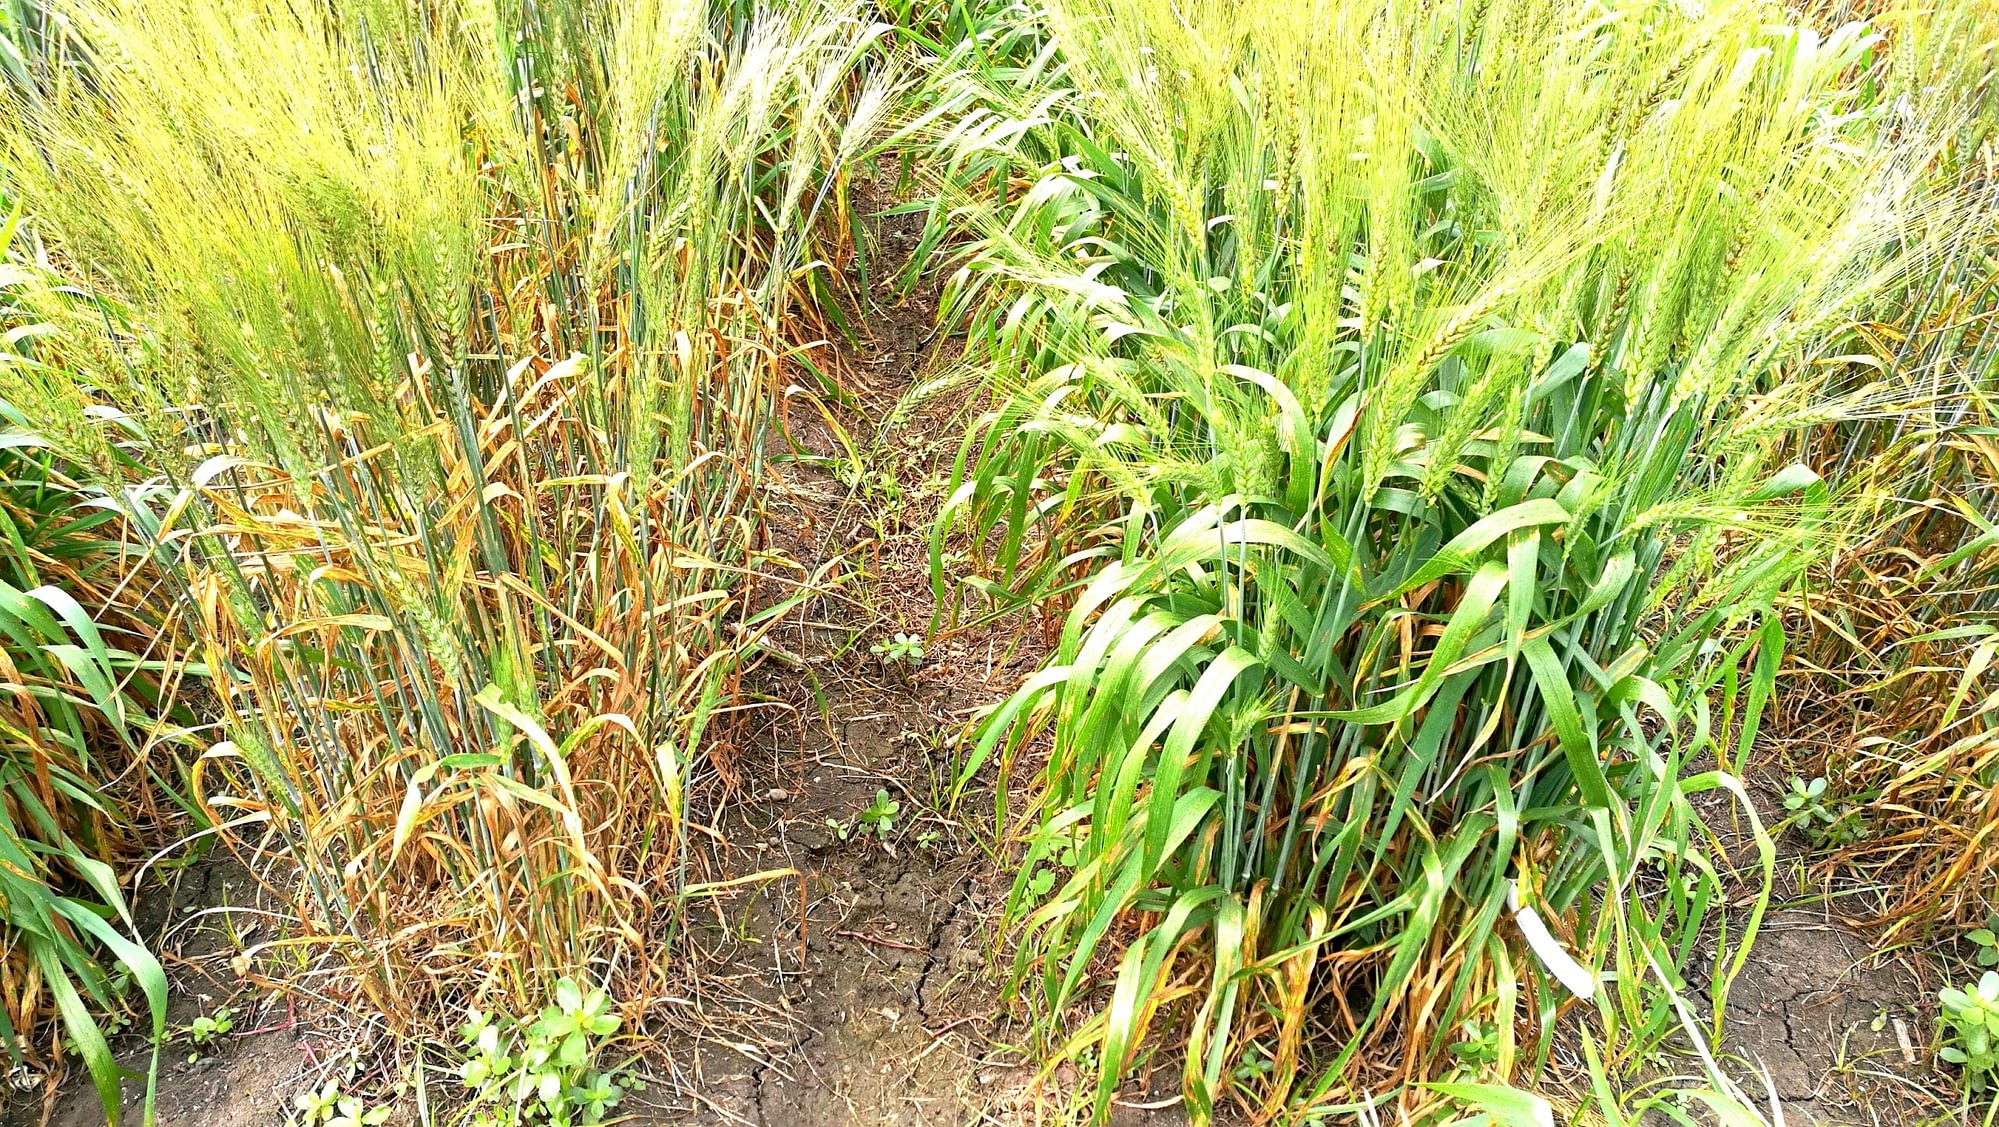 Spot blotch susceptible wheat lines (left) and resistant lines. (Photo: Xinyao He and Pawan Singh/CIMMYT)